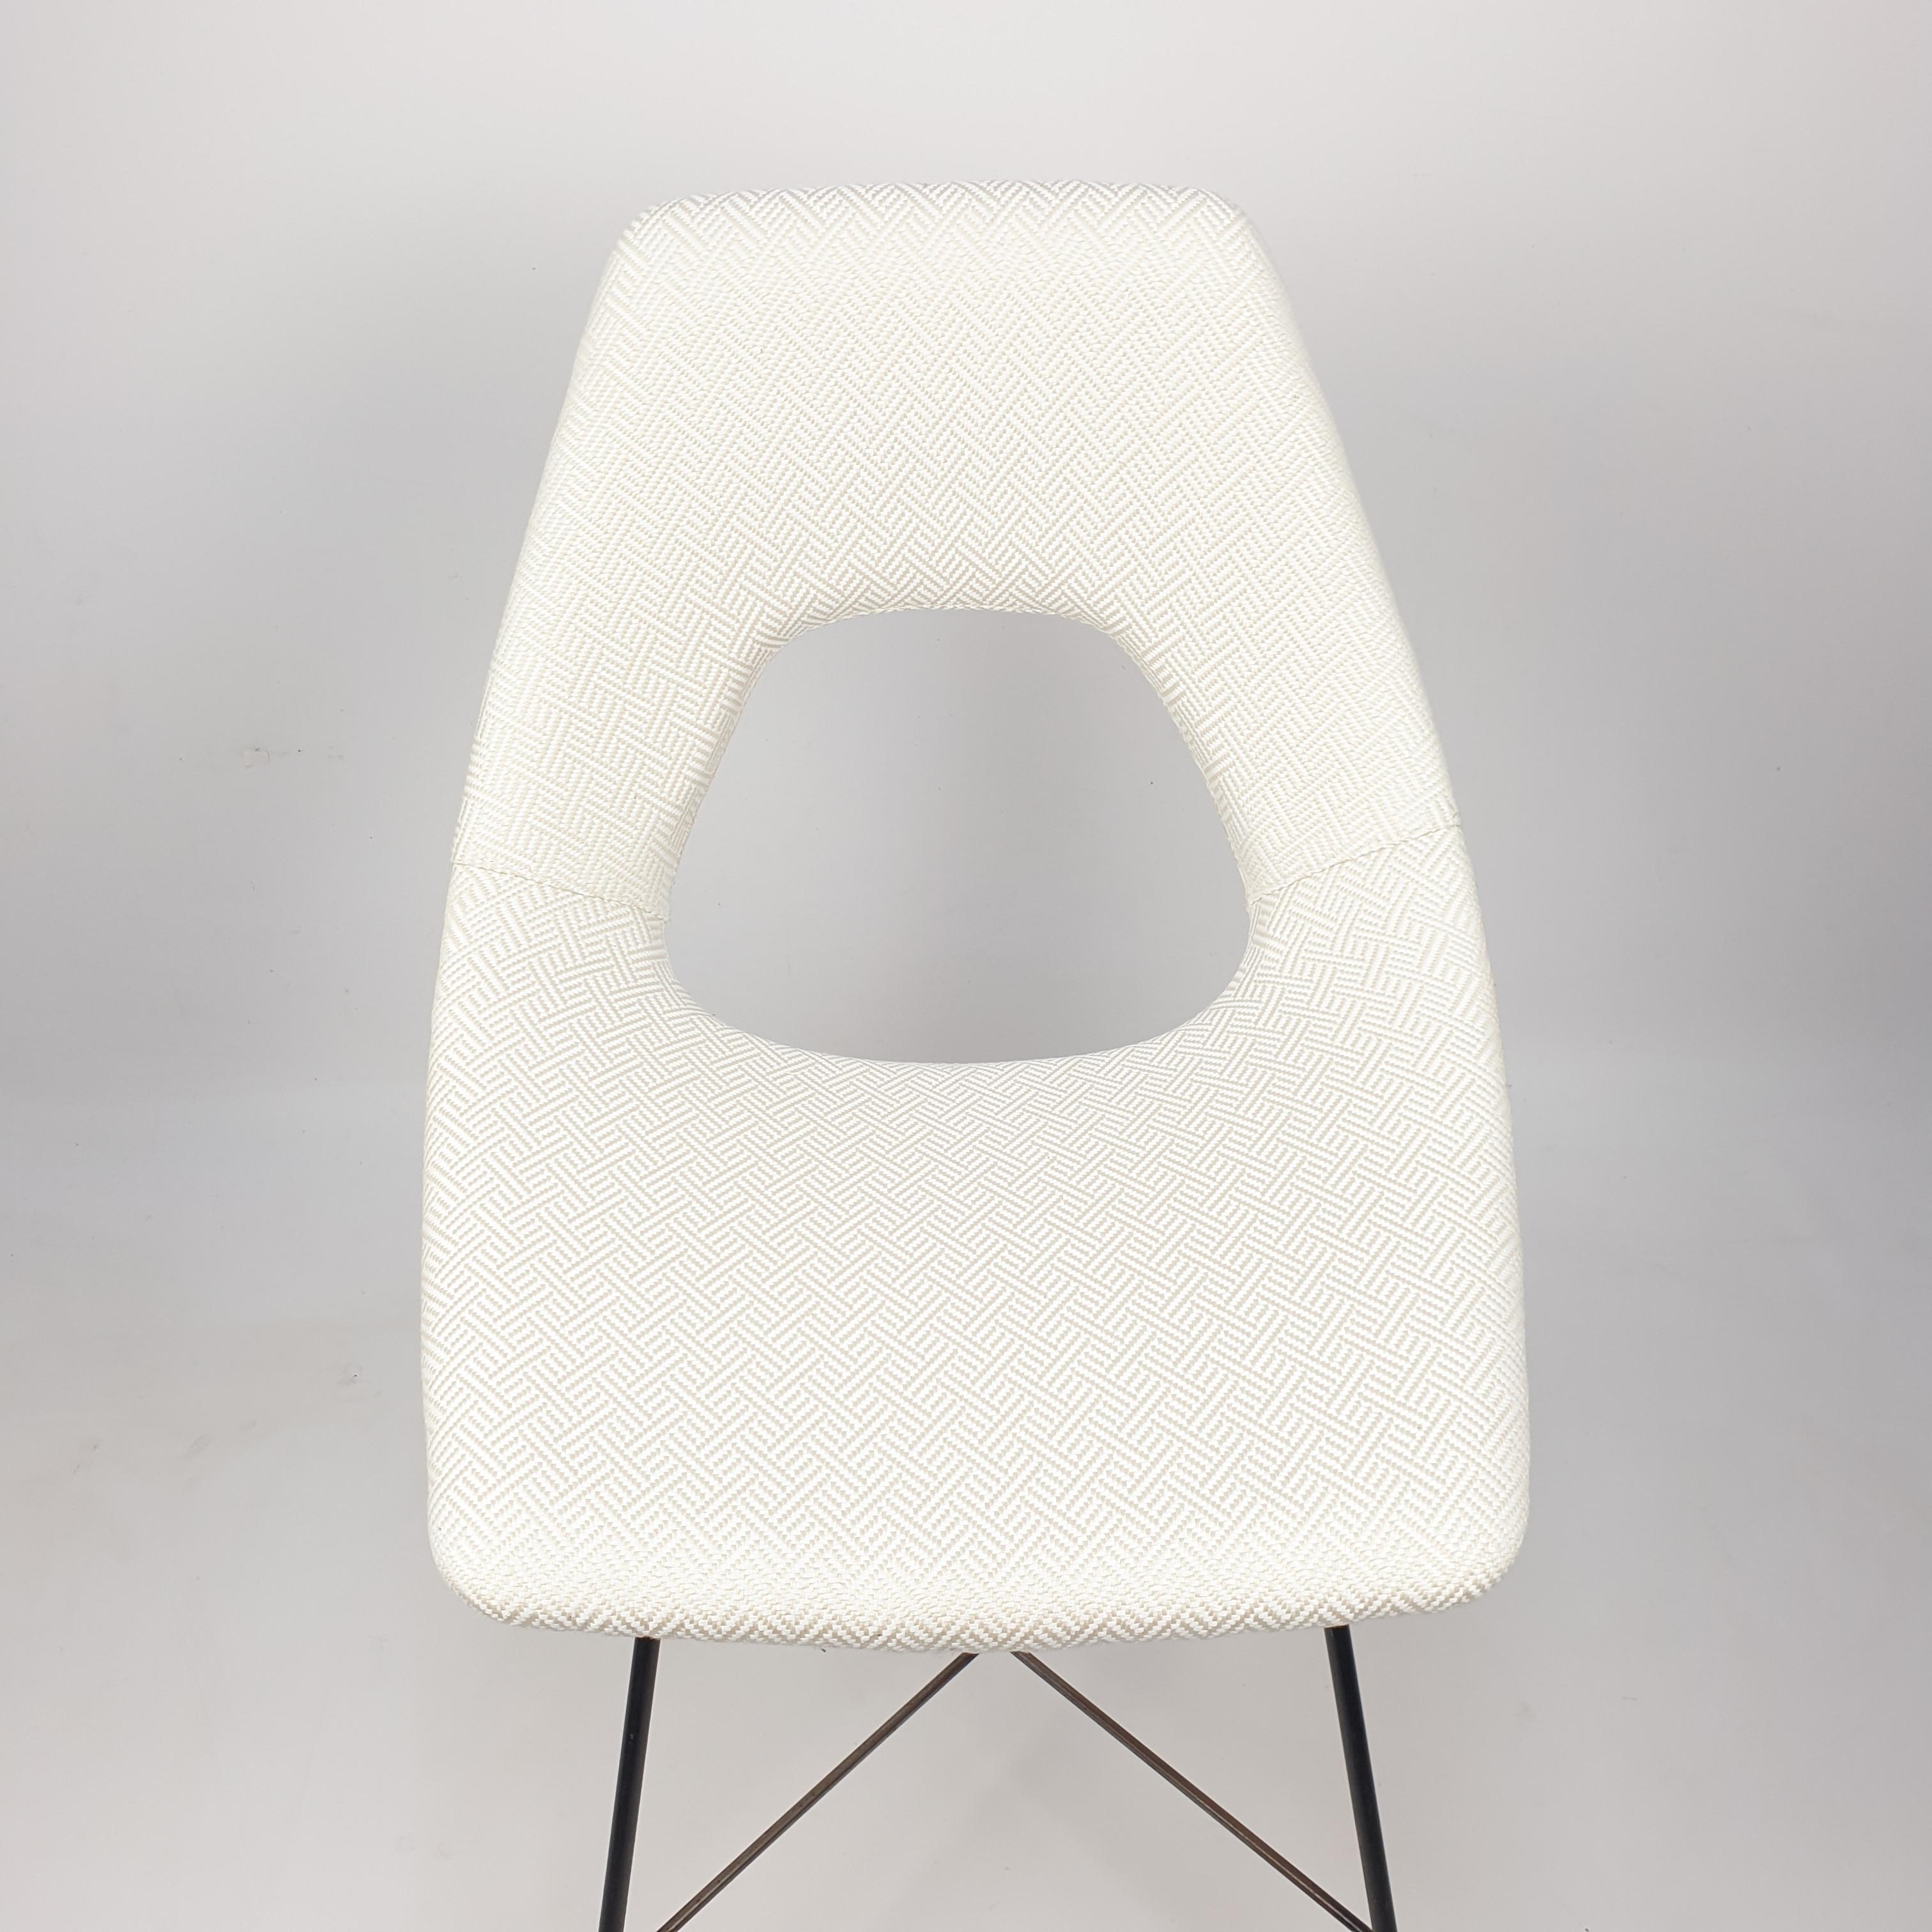 Cosmos Dining Chair by Augusto Bozzi for Saporiti Italia, 1950s For Sale 1